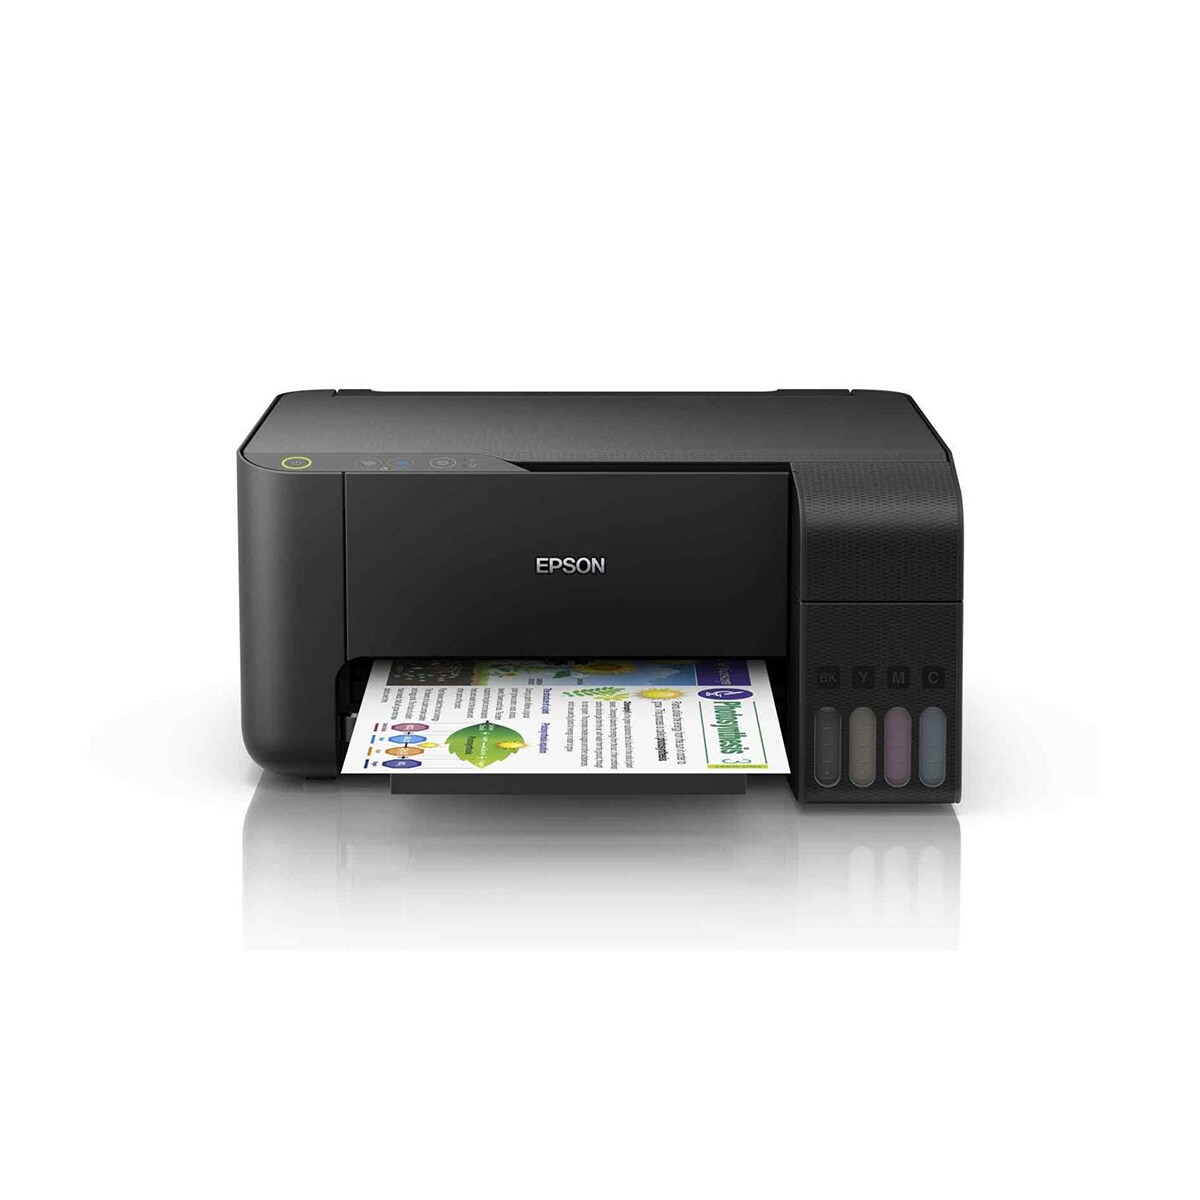 EPSON ECOTANK L3110/L3116 3 IN 1 PRINT SCAN COPY REFILLABLE INK TANK PRINTER, ALL IN ONE MULTI FUNCTION COLOUR PRINTER, ANTI UV INK, WITH 1 SET ORIGINAL INK (BLACK/CYAN/MAGENTA/YELLOW) 3 YEARS WARRANTY EPSON PRINTER L3110 L3116